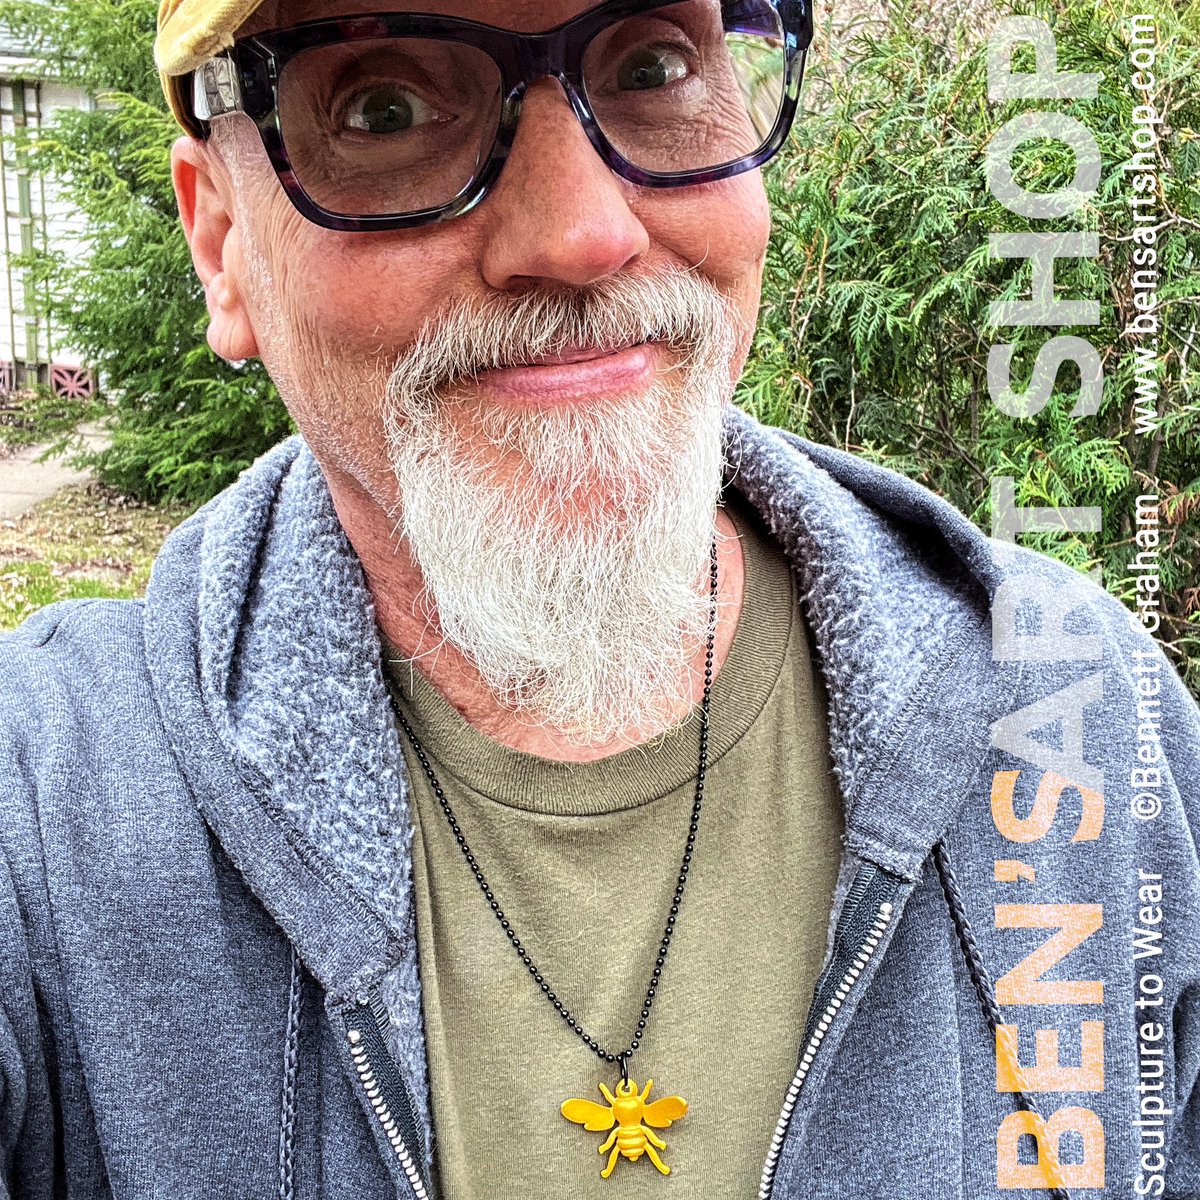 Show your pollinator respect with a bee pin or pendant. It’s wearable art from Minneapolis sculptor Bennett Graham. #beejewelry #pollinators #honey #beekeeping etsy.com/listing/147190…